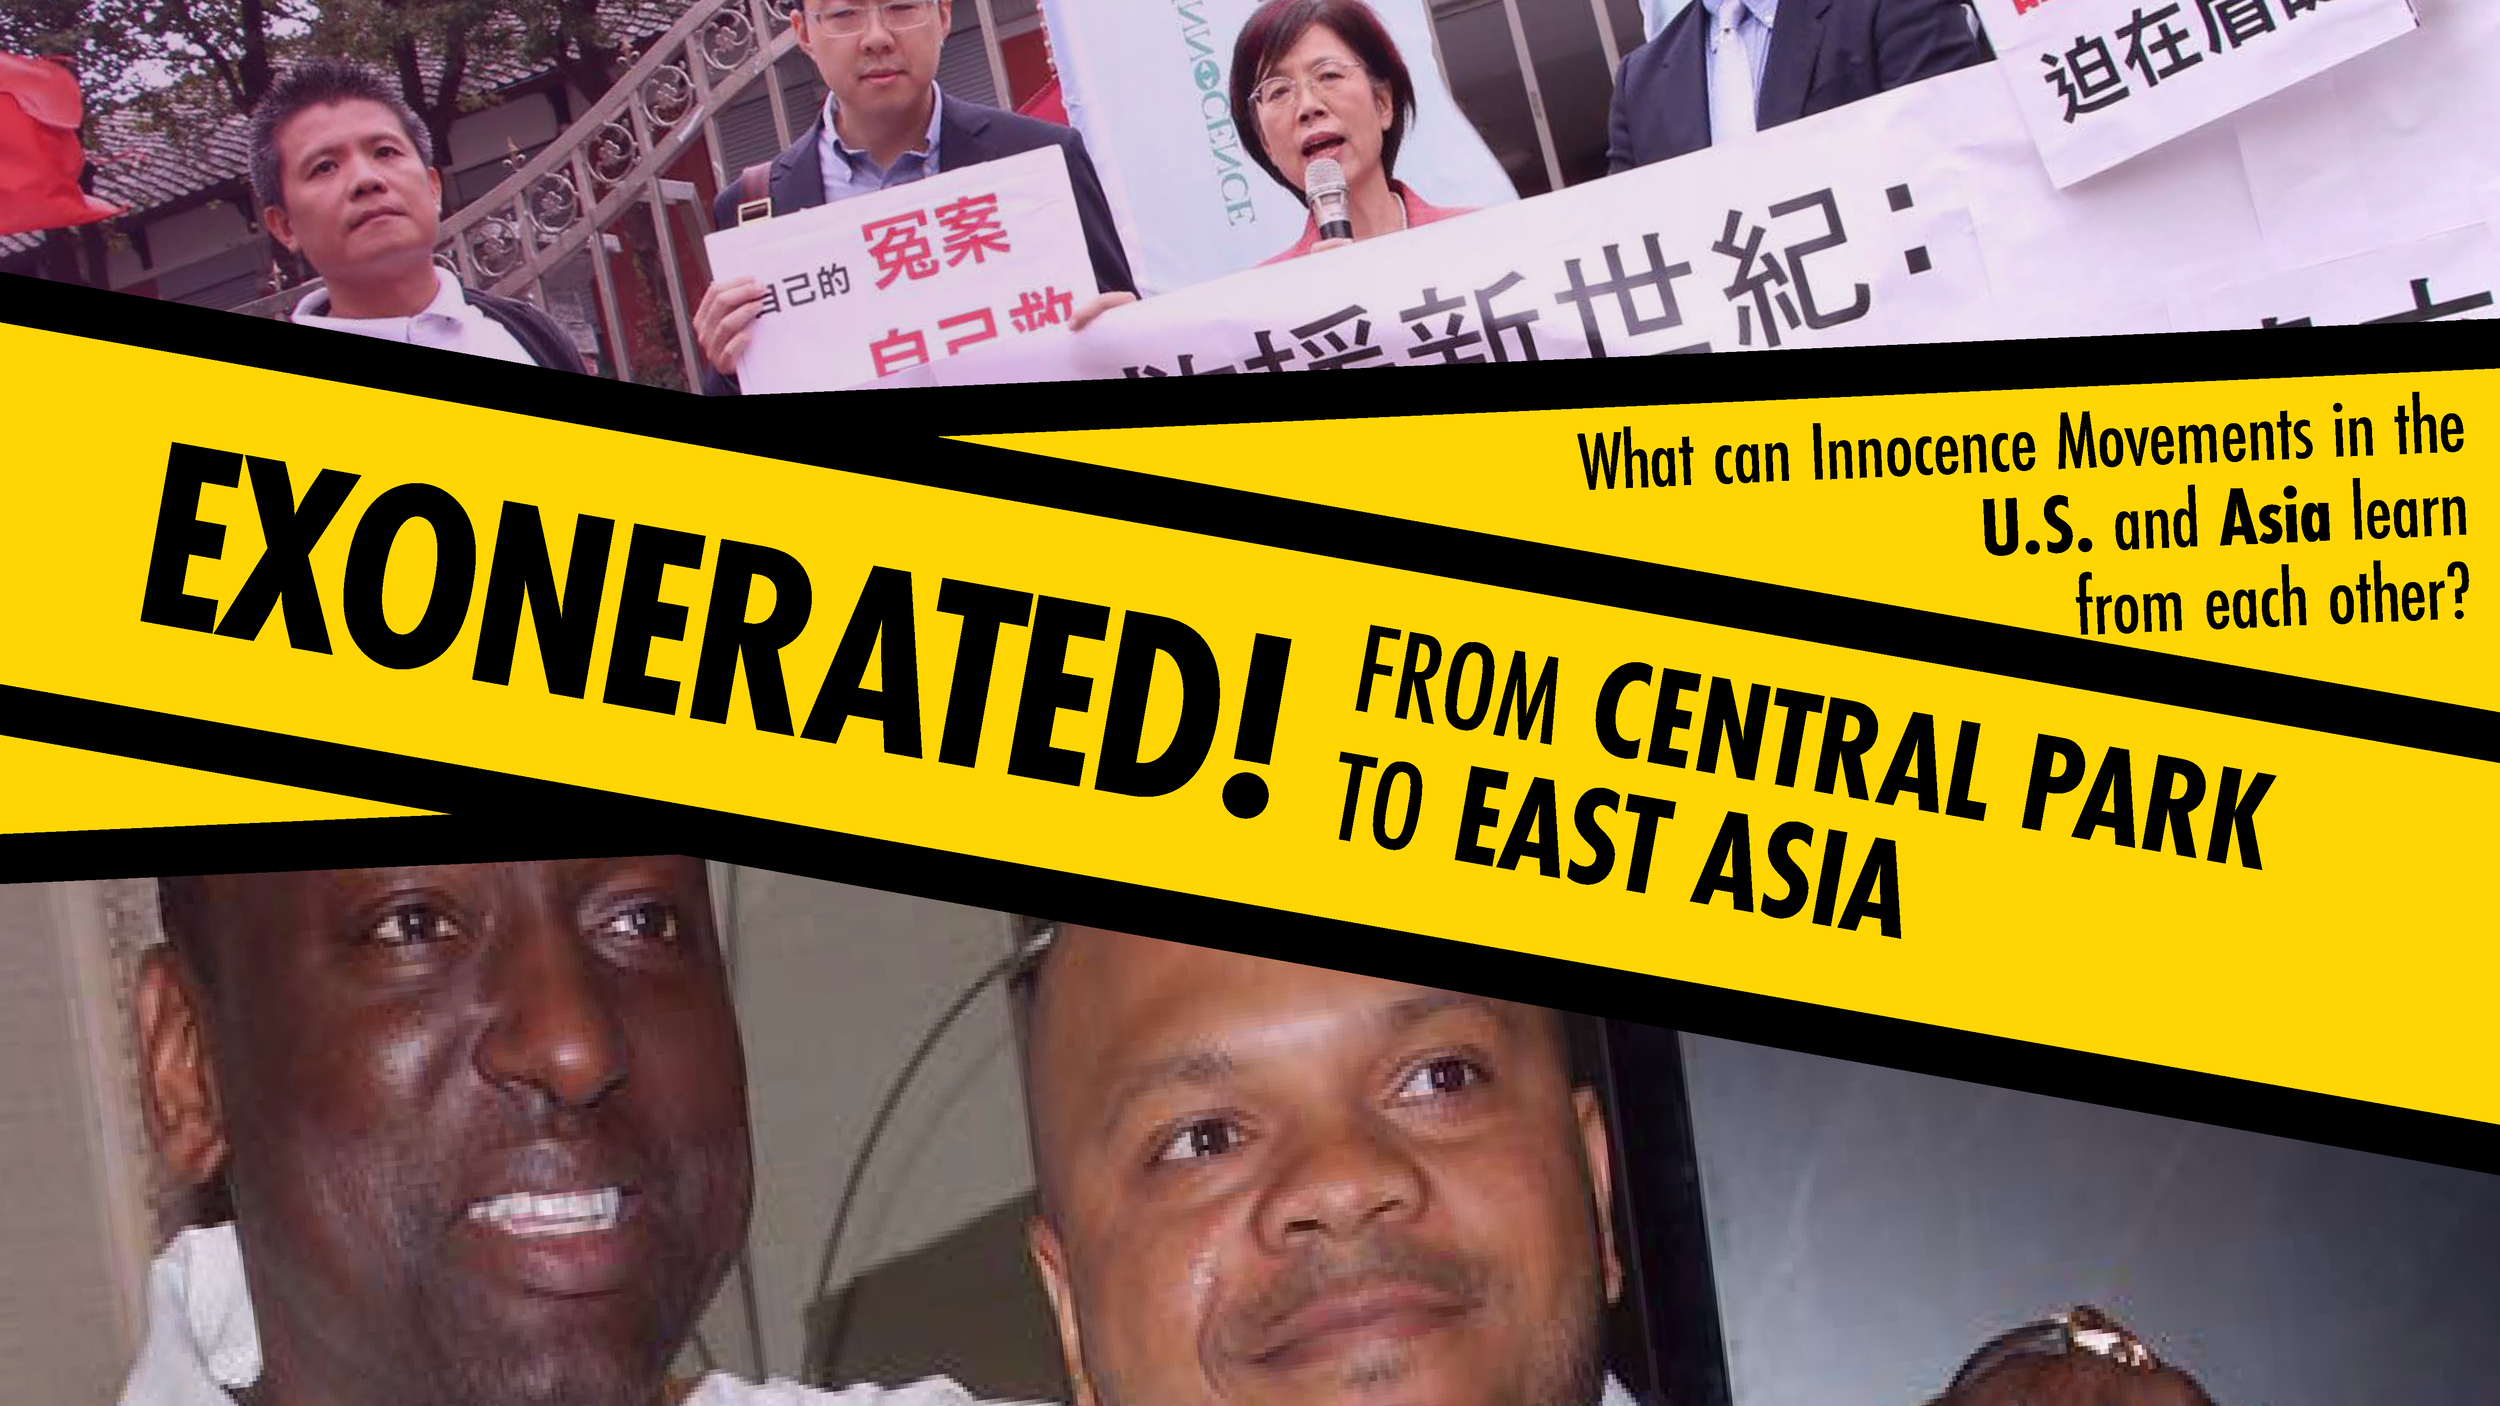 Exonerated! From Central Park to East Asia